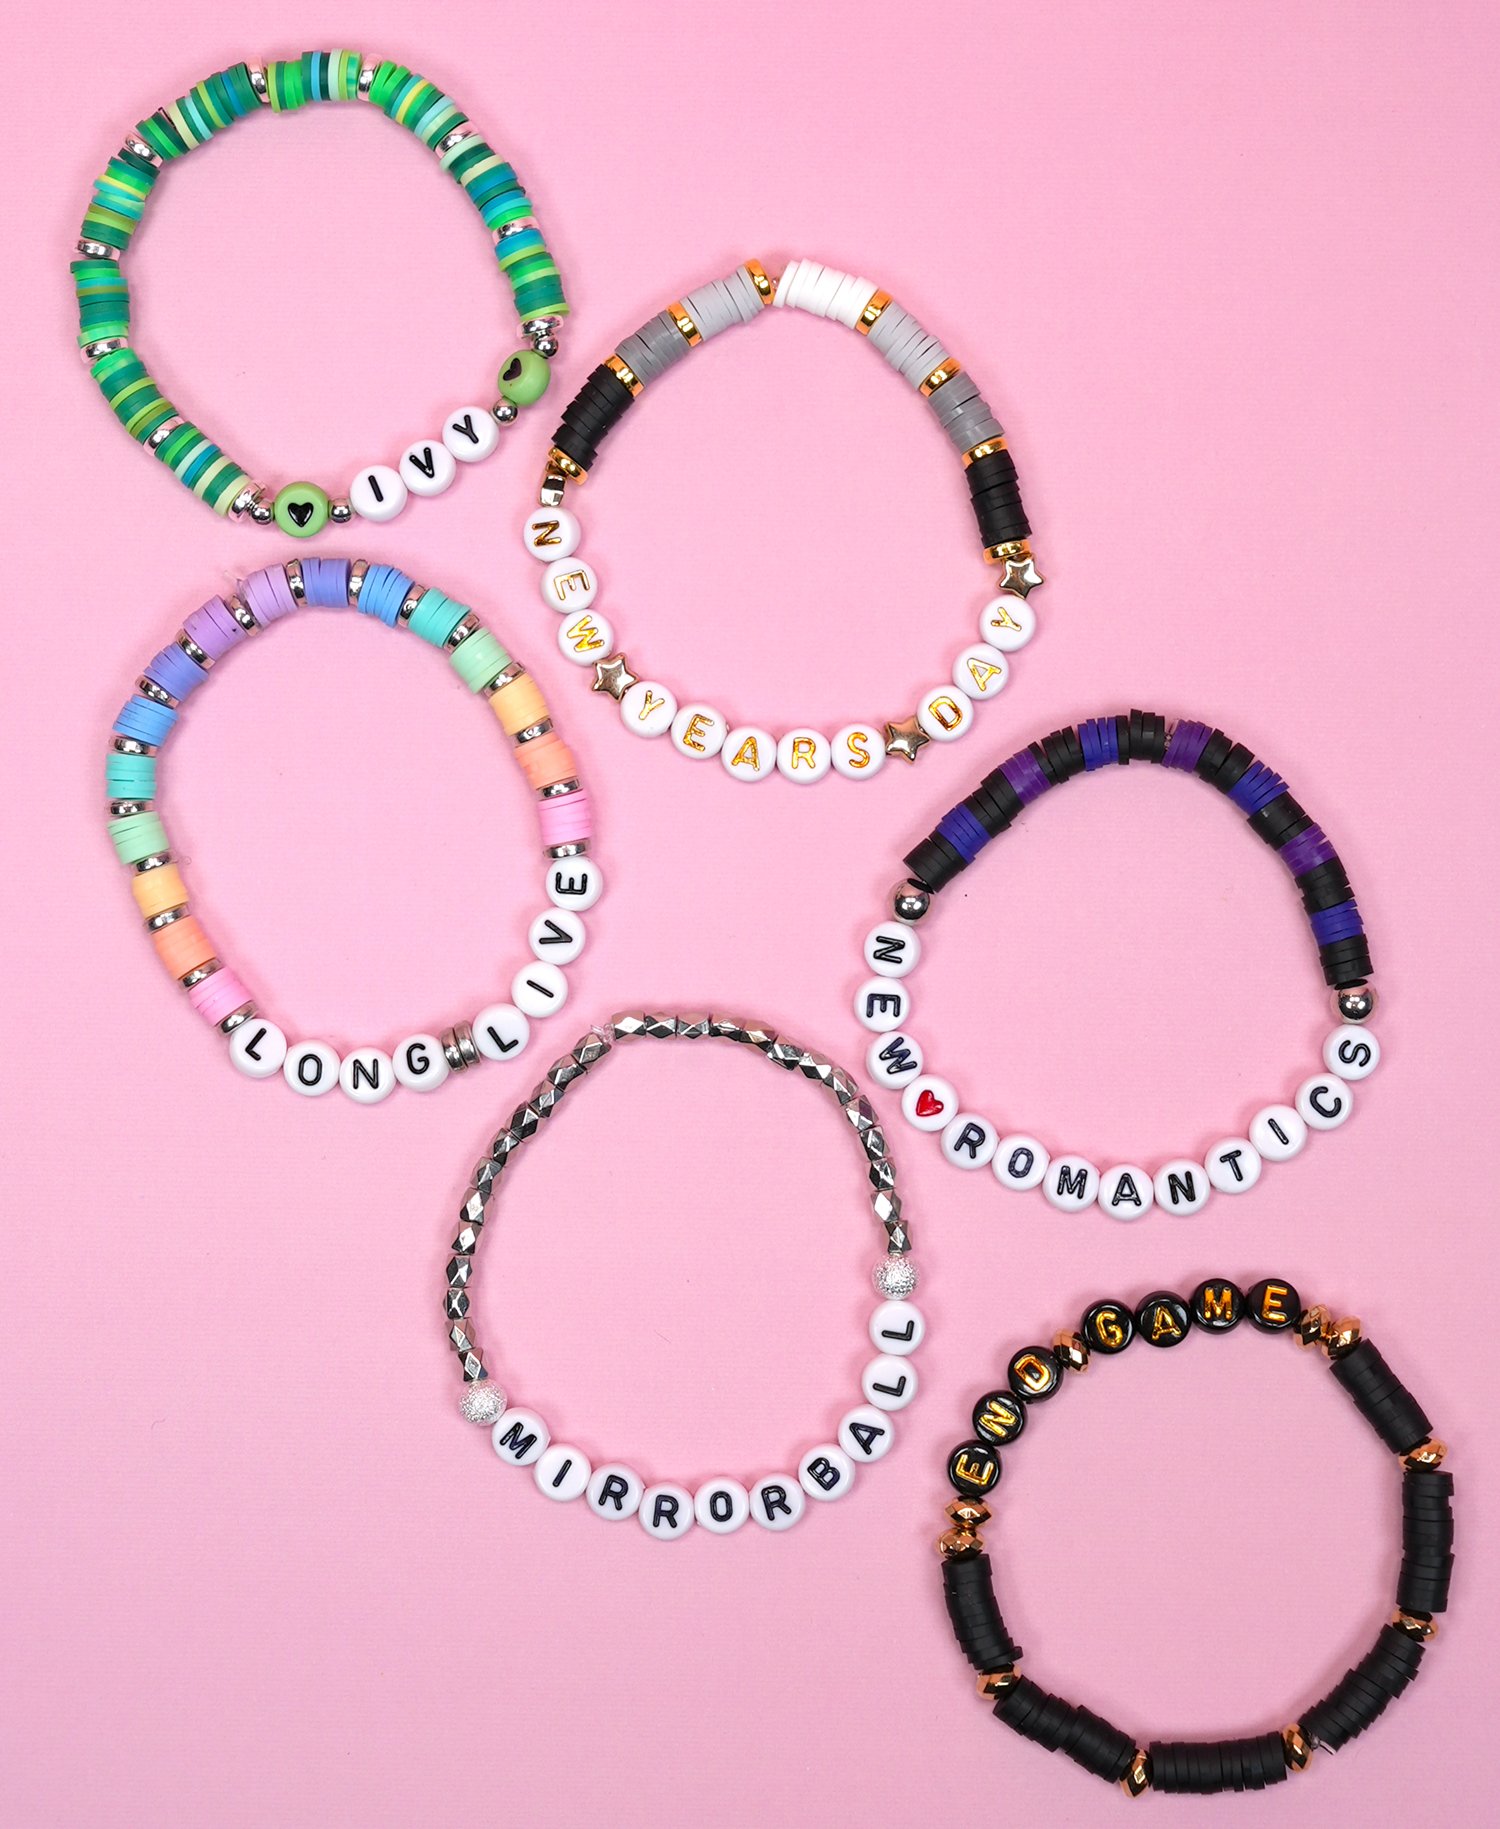 Six colorful beaded bracelets with Taylor Swift "surprise song" song titles on pink background